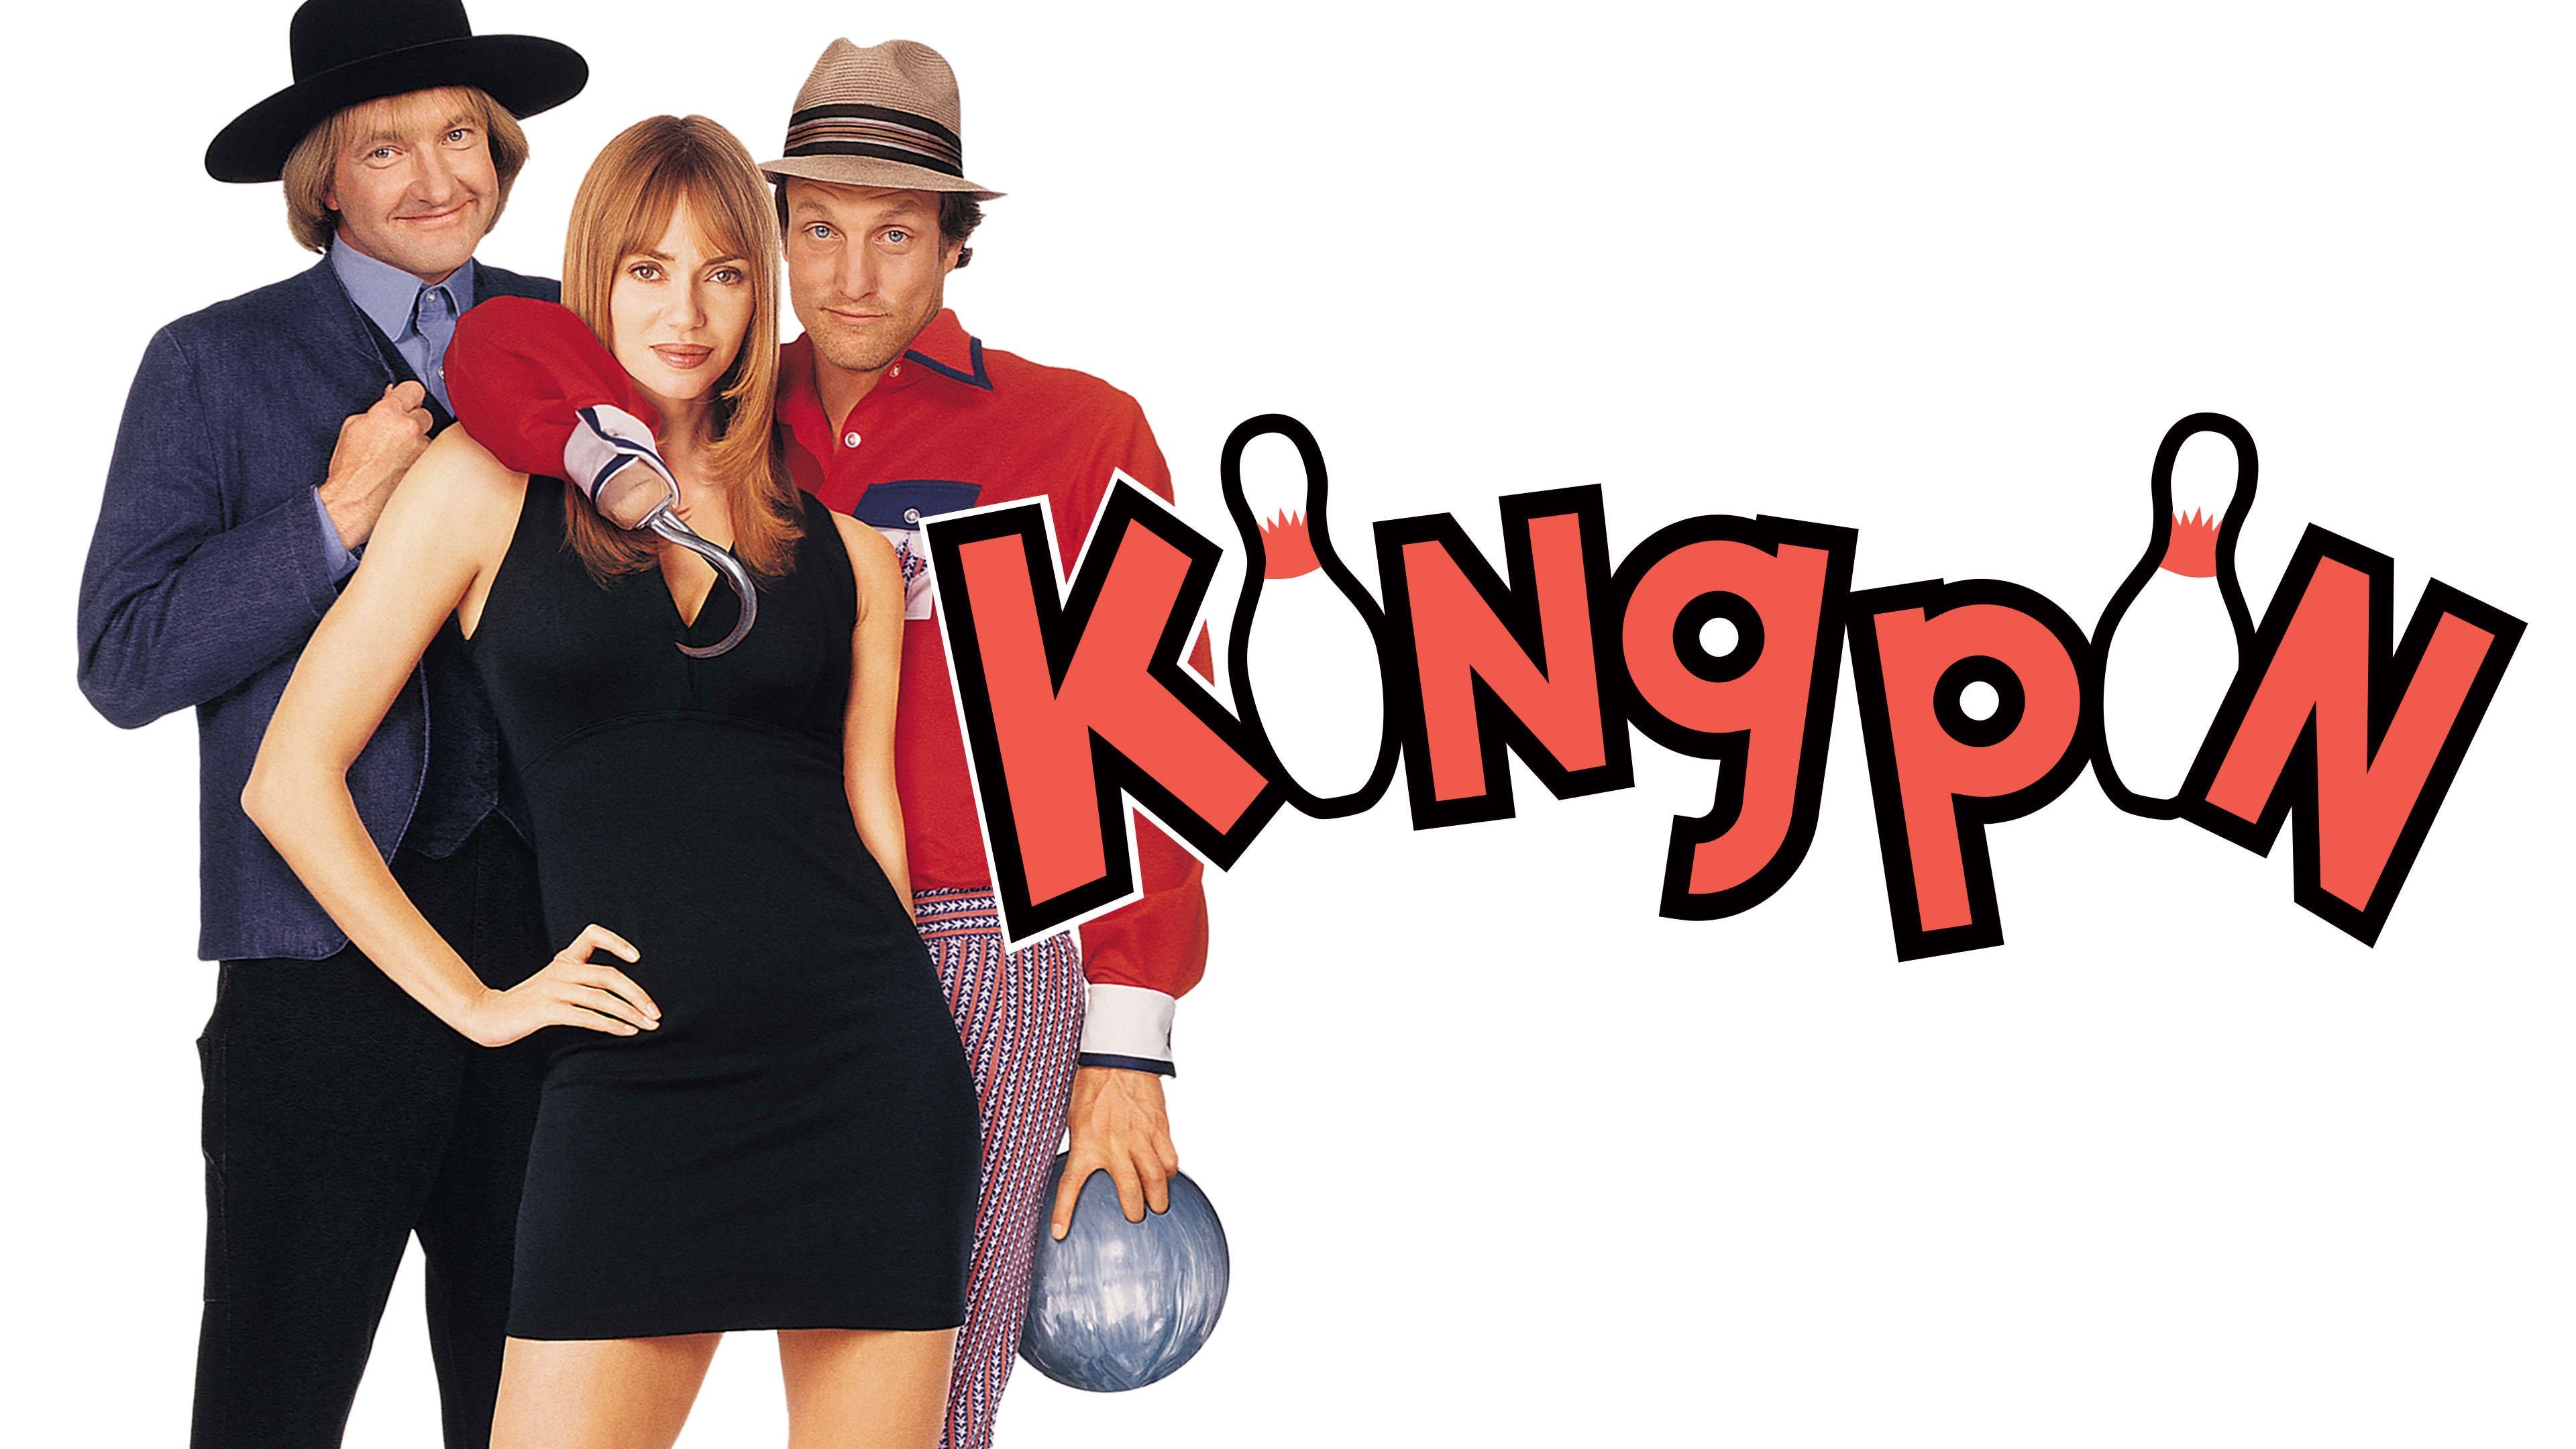 How to watch and stream Kingpin - 1996 on Roku